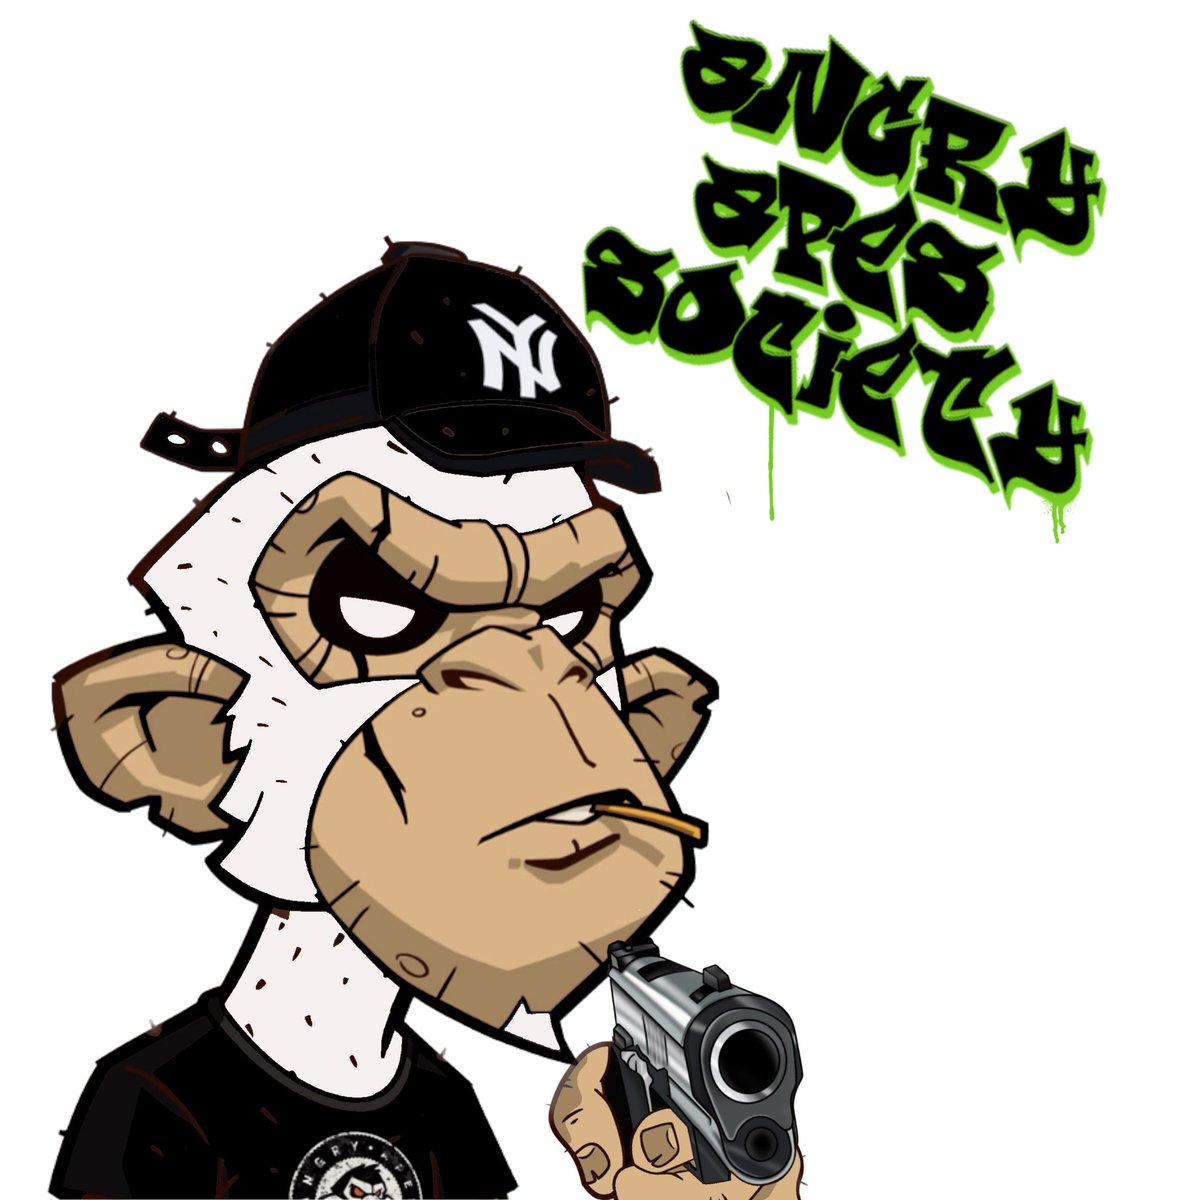 @gr0uchSol Badass pfp bro ☺️🙏🏻

 🍀 #AAS #StayAngry #AngryApesNFT #AngryButHappy  #AngryApes #NFTCommunity #AngryRaiders🏴‍☠️